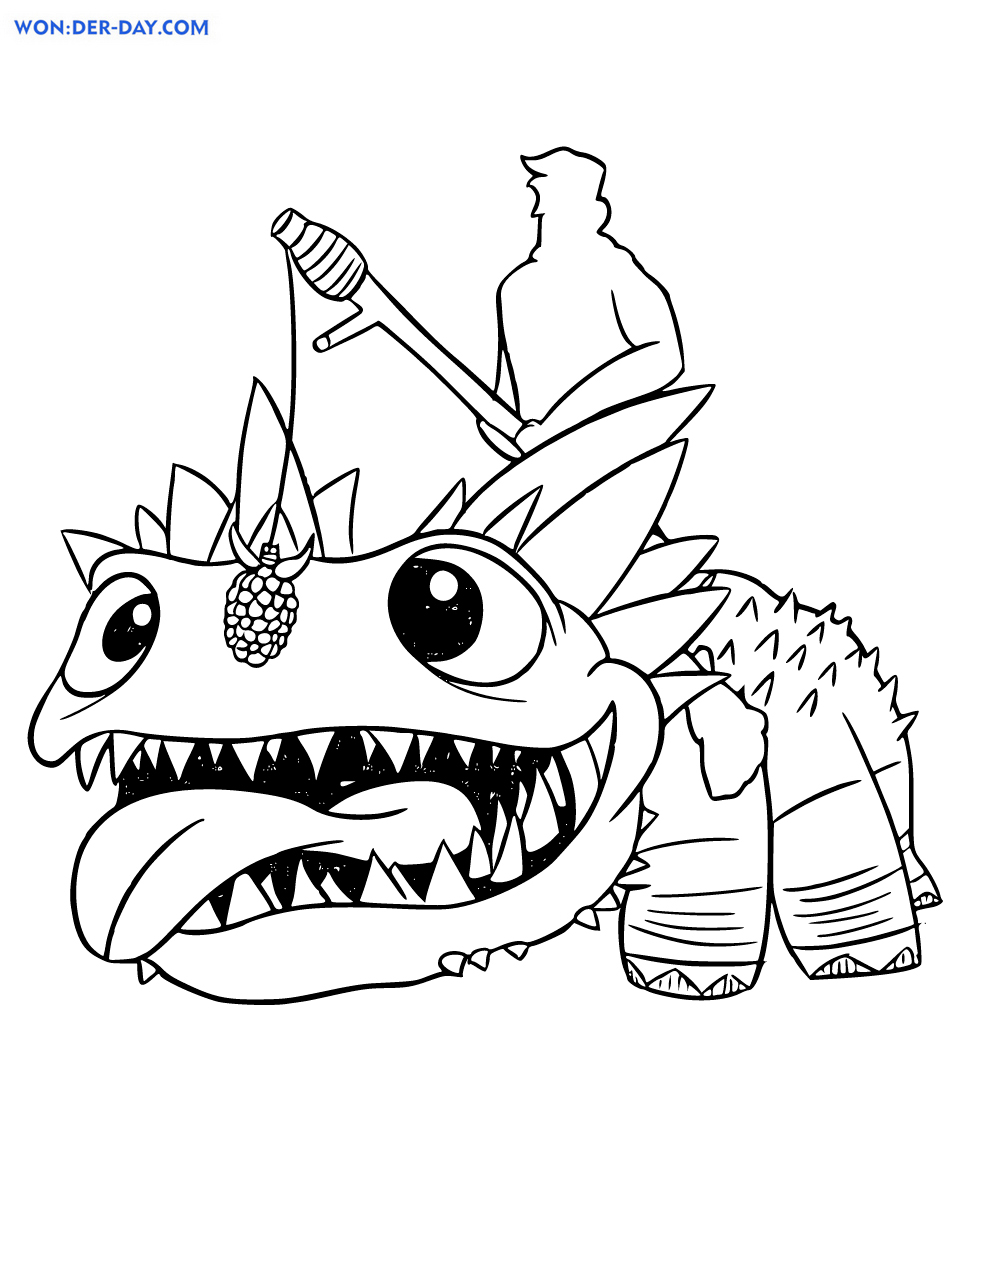 Klombo Fortnite Coloring Pages   WONDER DAY — Coloring pages for ...